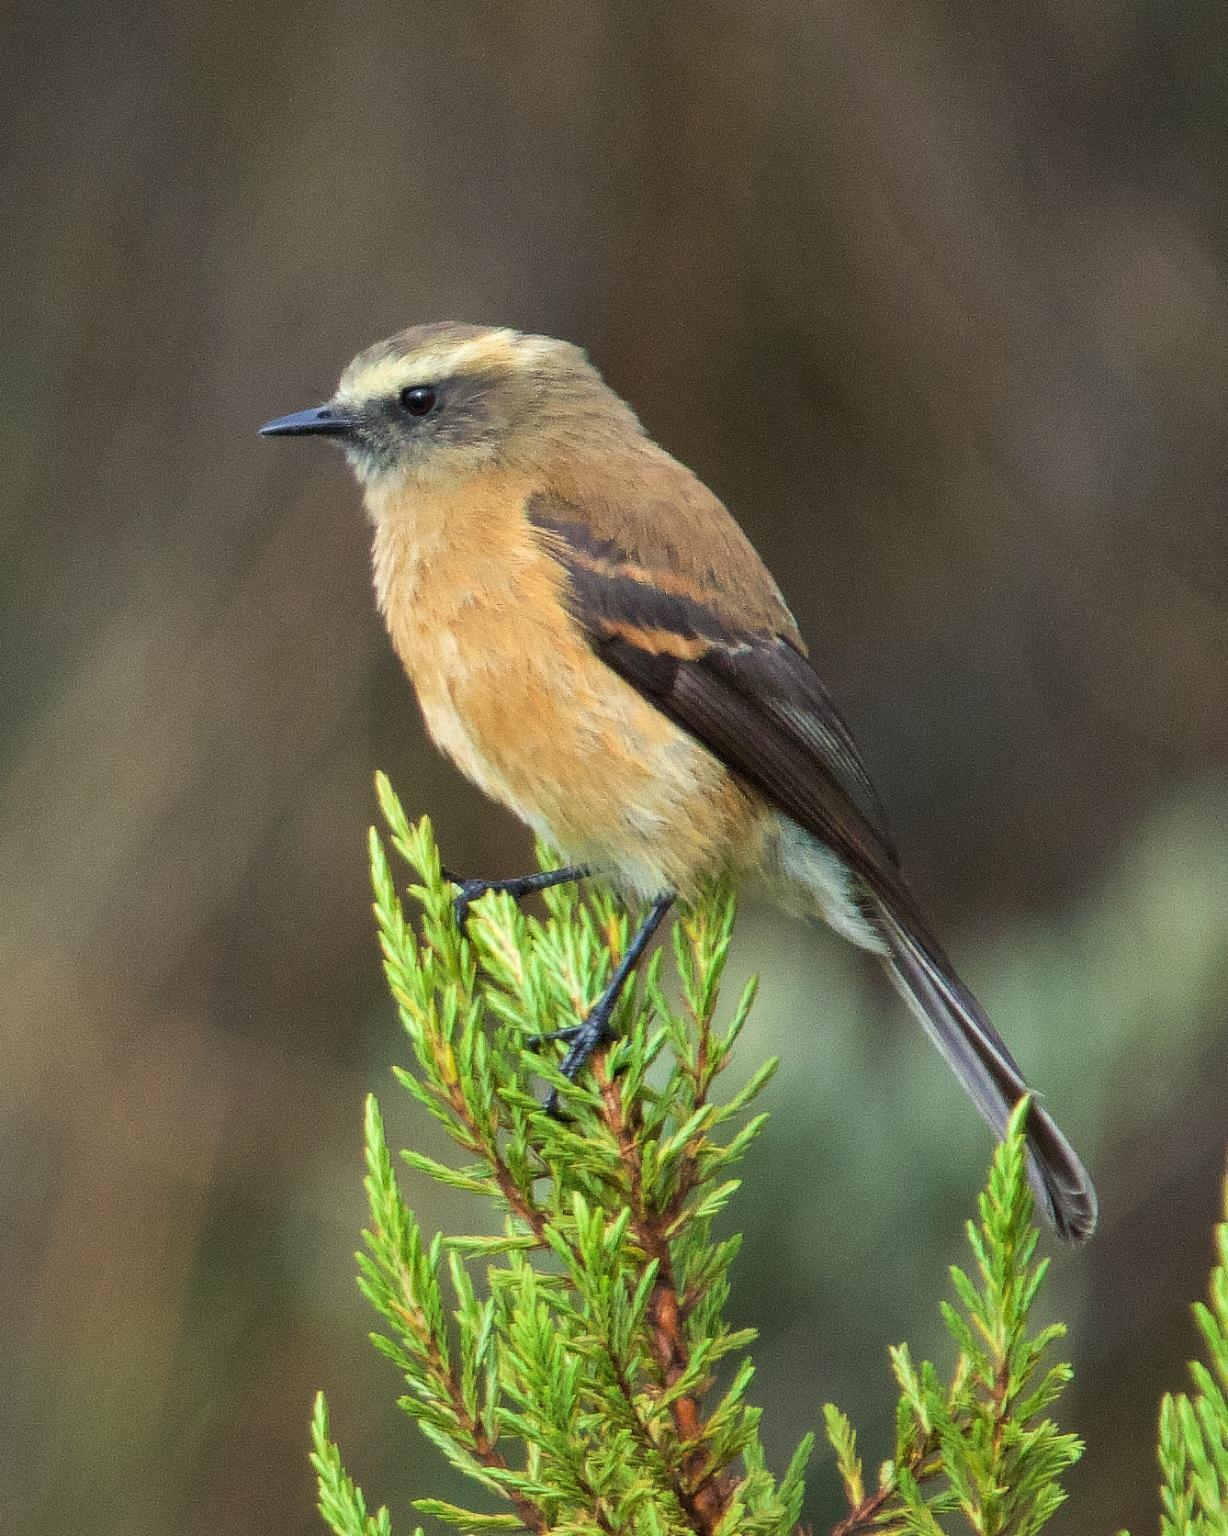 Brown-backed Chat-Tyrant Photo by Denis Rivard